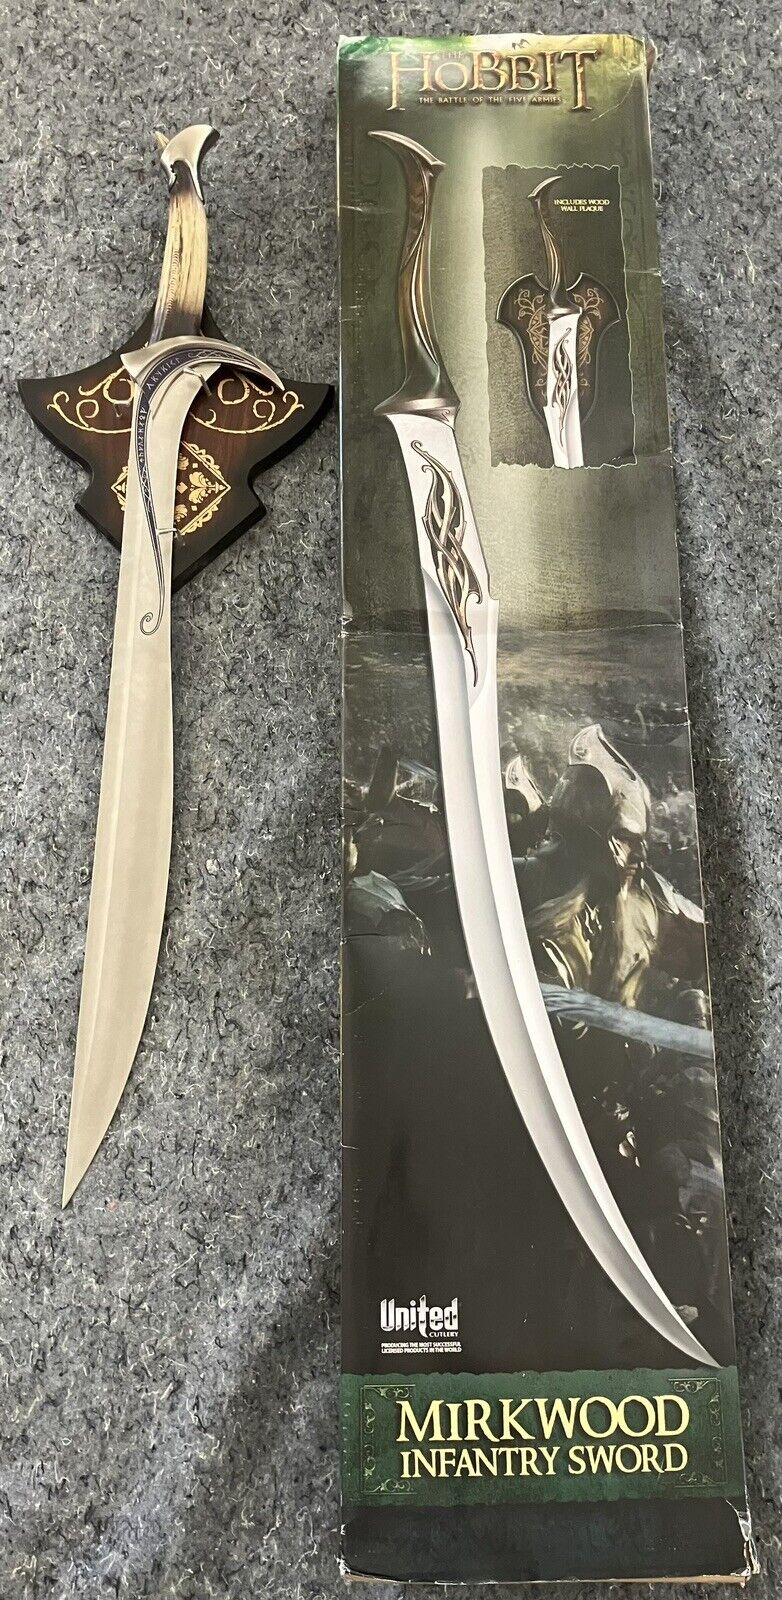 Officially Licensed The Hobbit Collectable Replica Swords